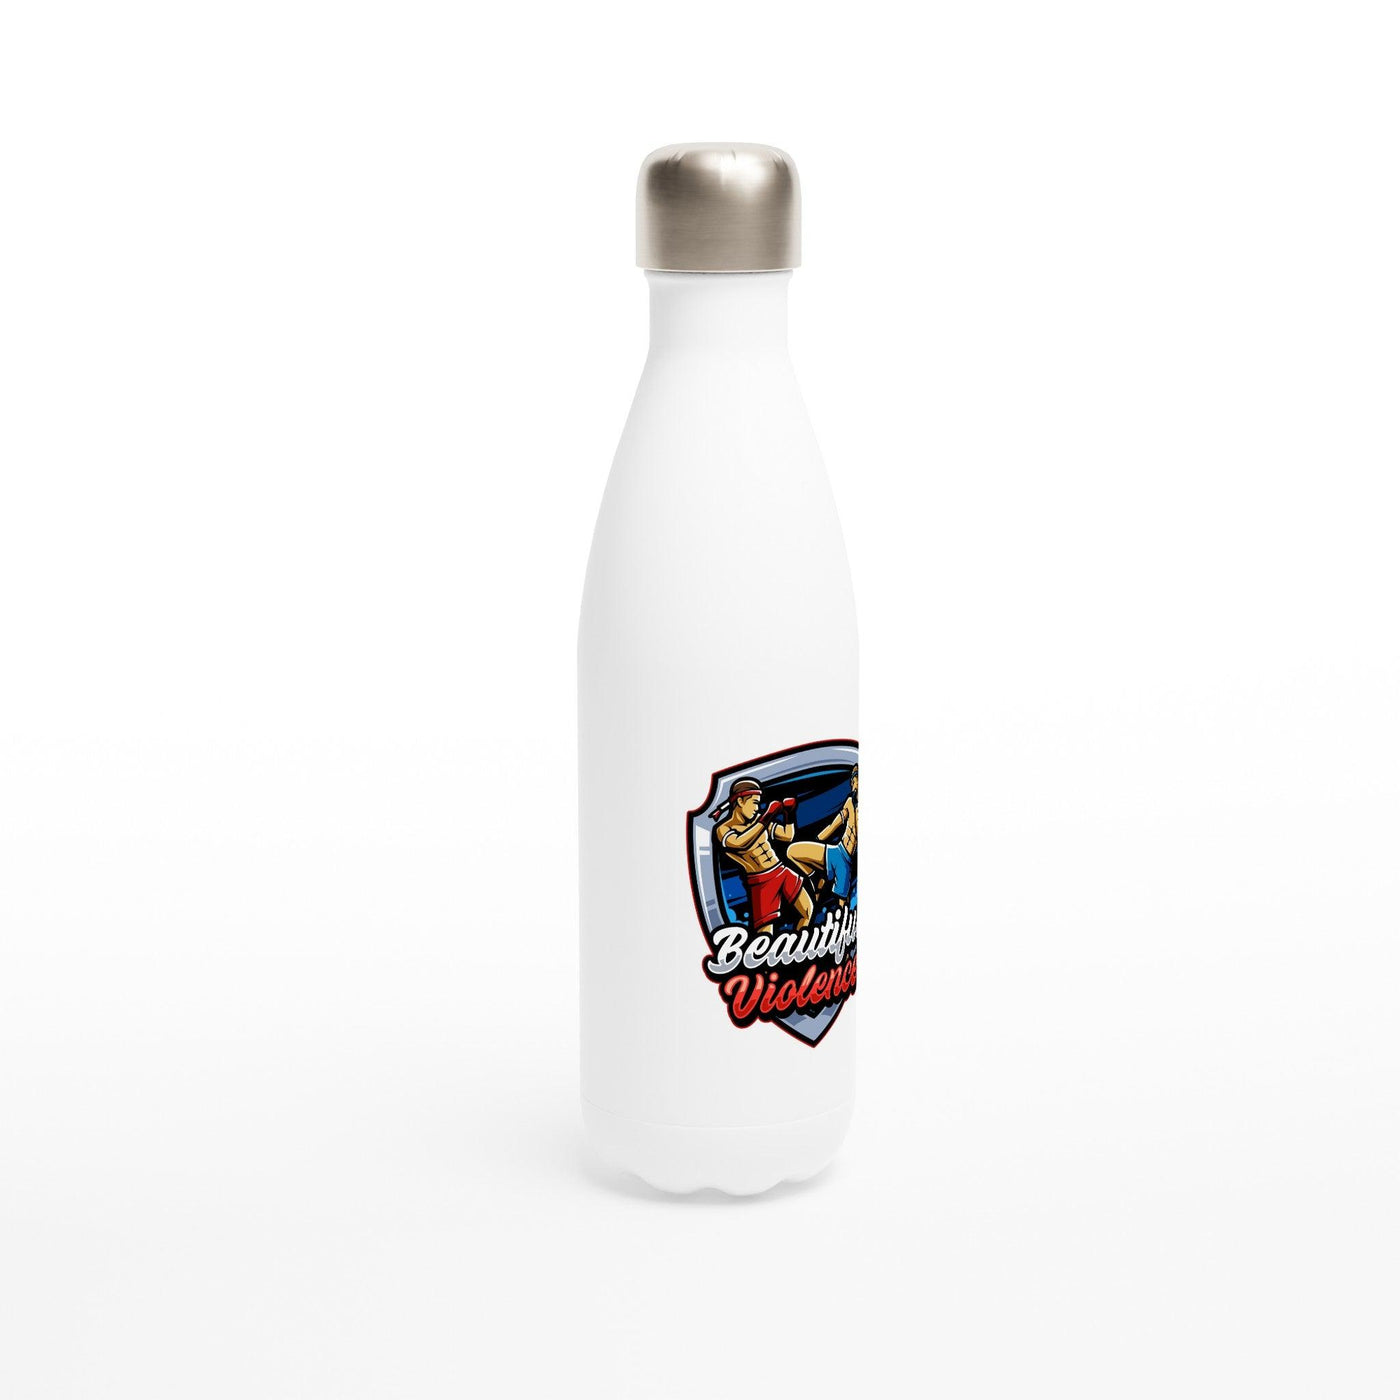 Beautiful Violence - White 17oz Stainless Steel Water Bottle - Muay Thailand